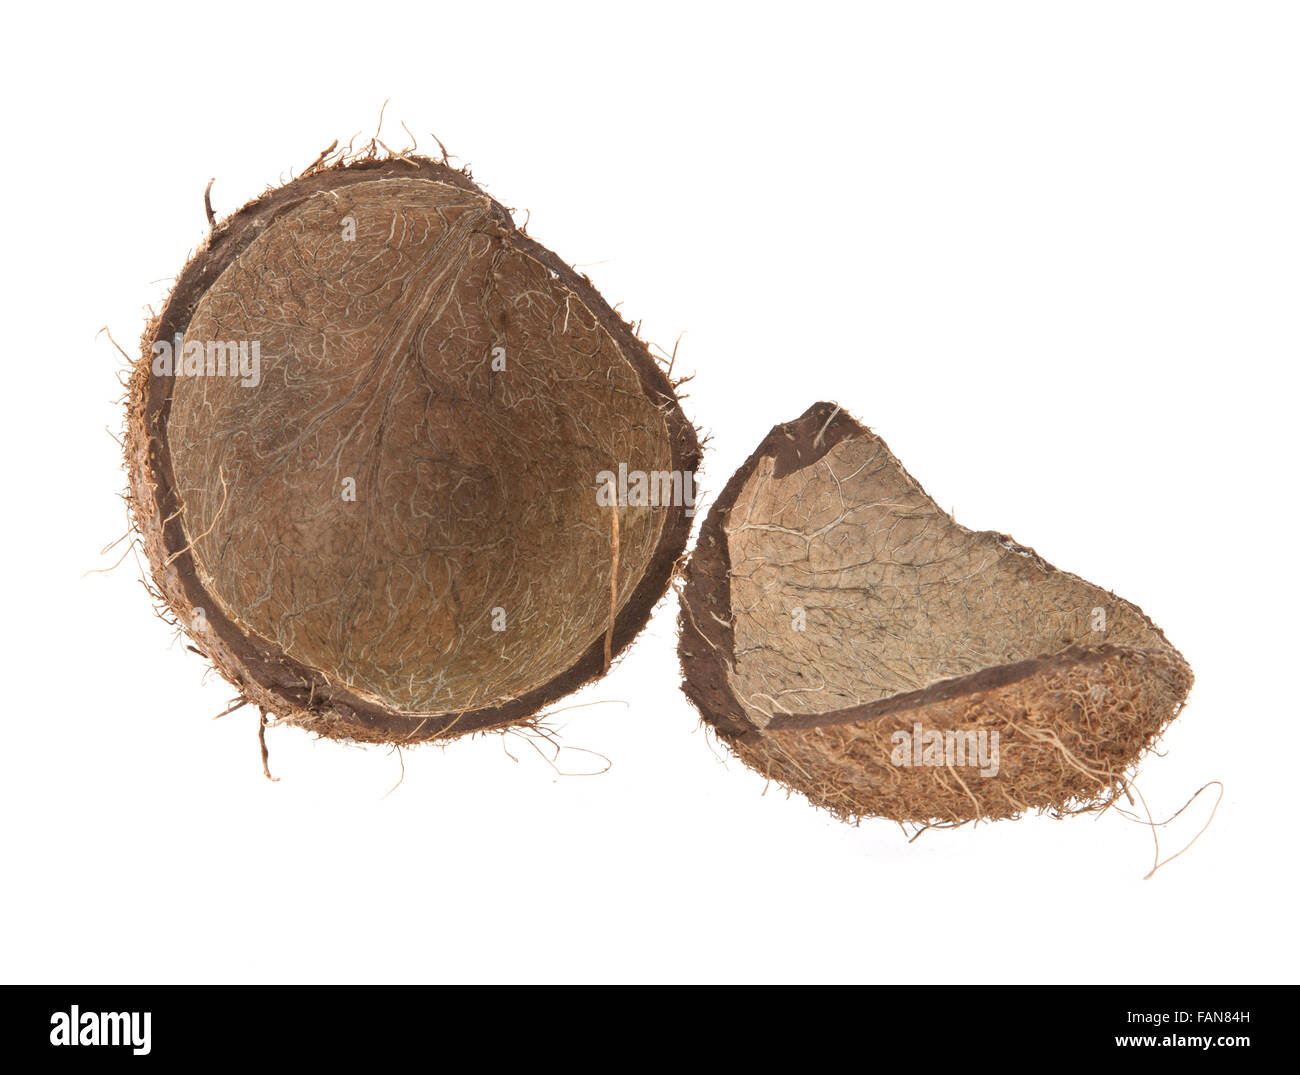 coconut shell on a white background Stock Photo